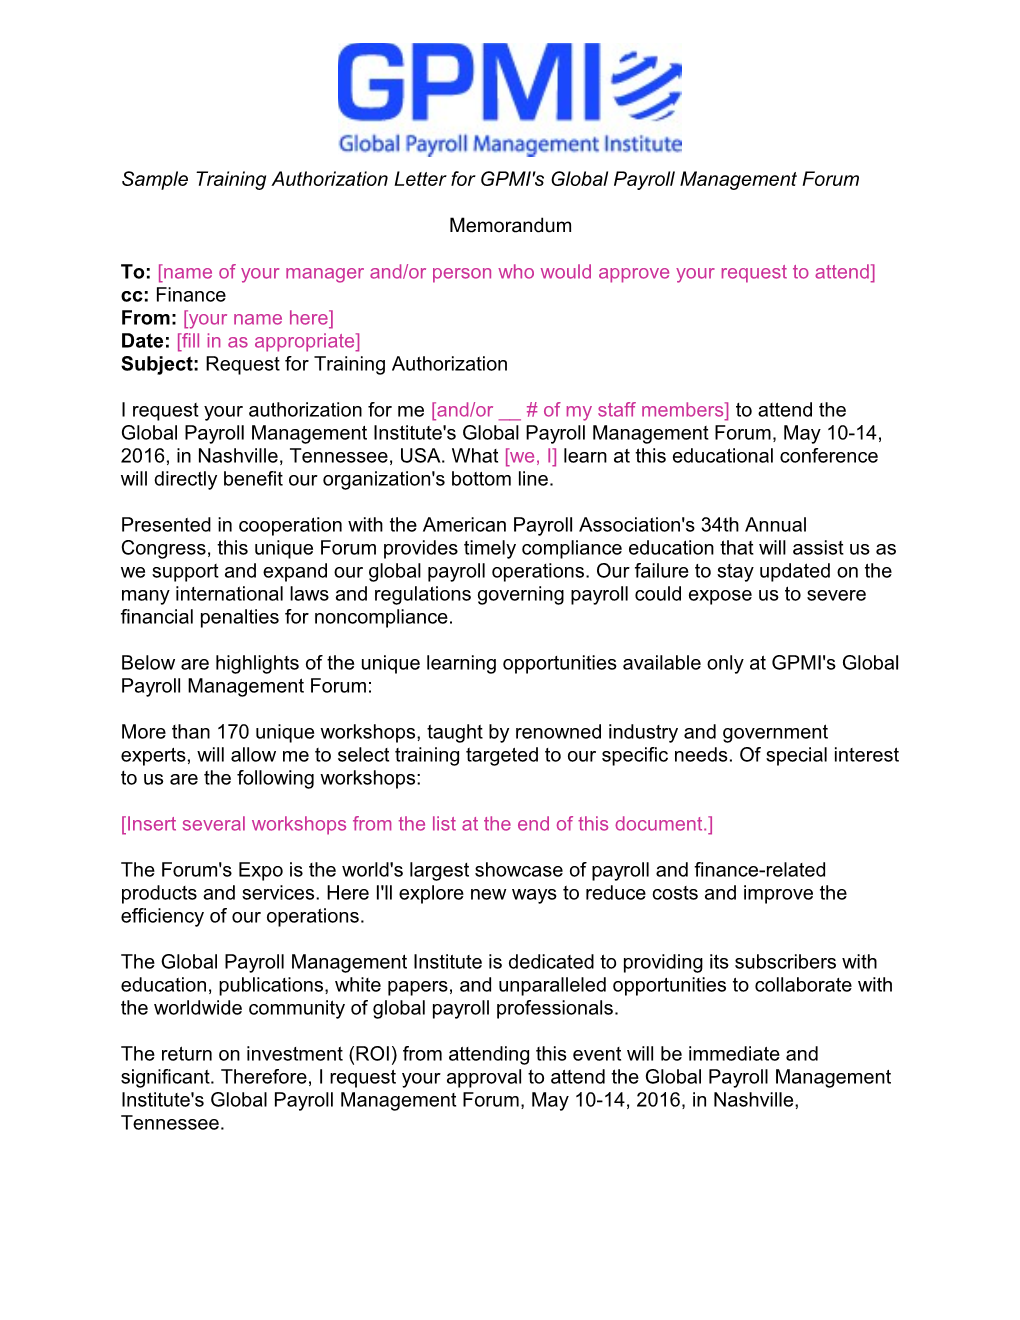 Sample Training Authorization Letter for GPMI's Global Payroll Management Forum